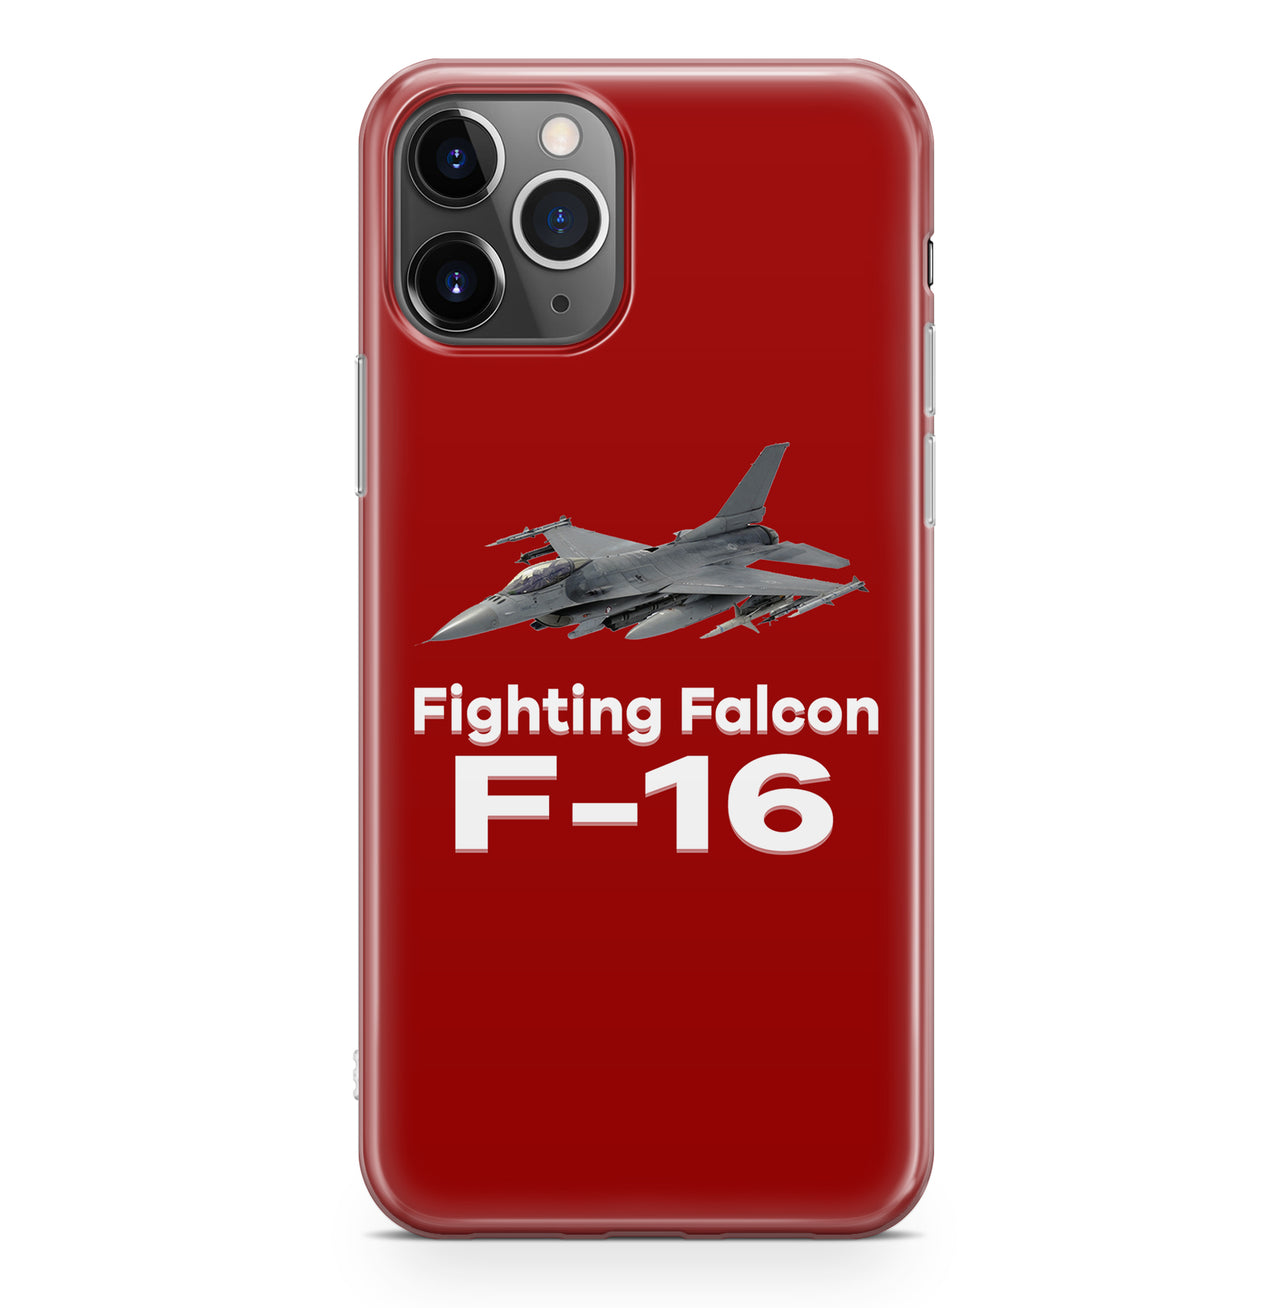 The Fighting Falcon F16 Designed iPhone Cases